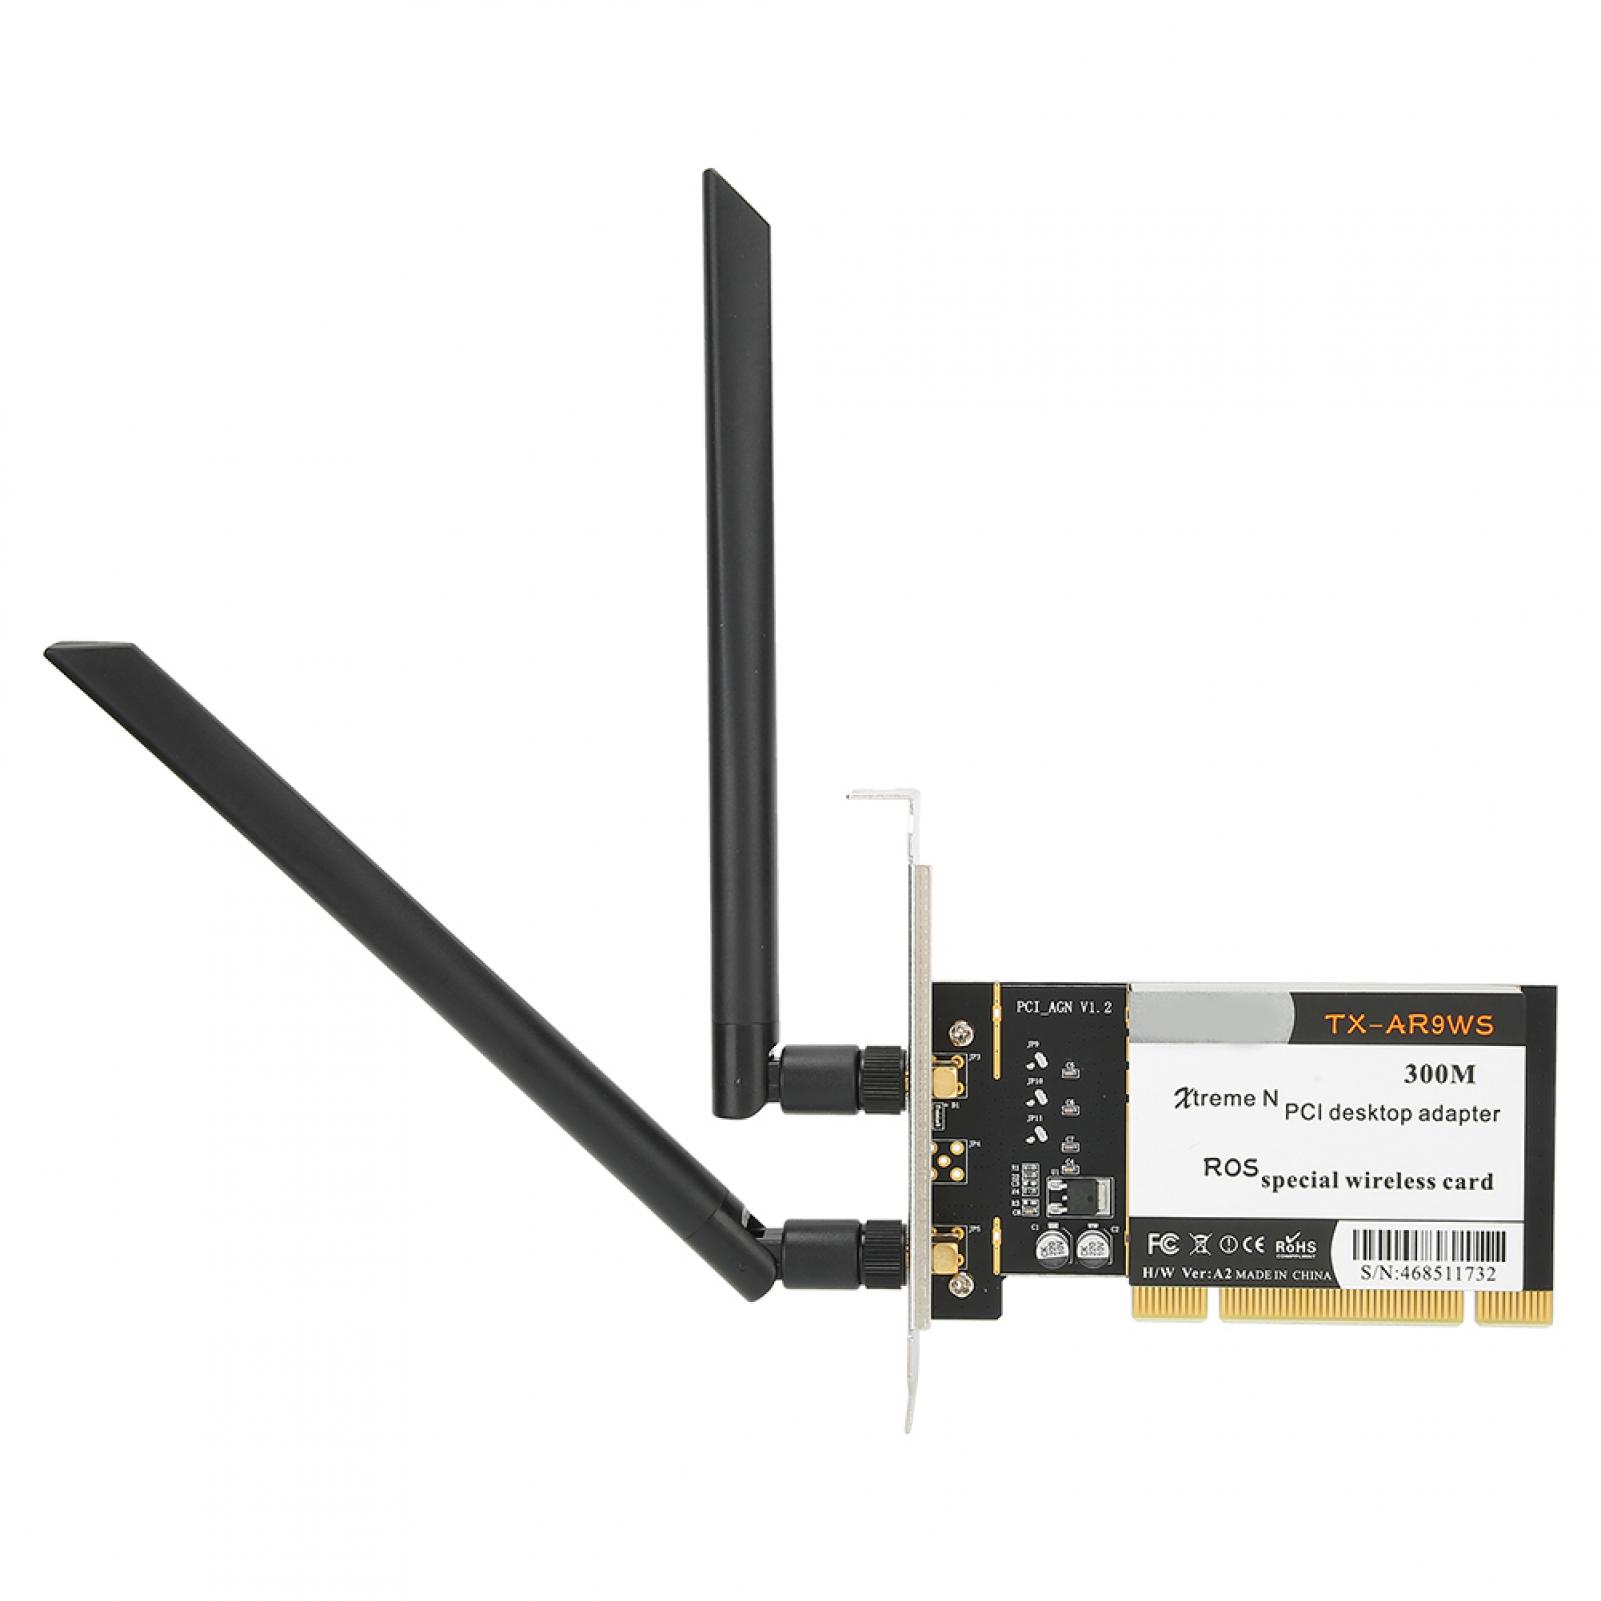 PCI Wifi Card Network Card, Ar9220 PCI Desktop Adapter, For Xp 32/64 - image 2 of 8